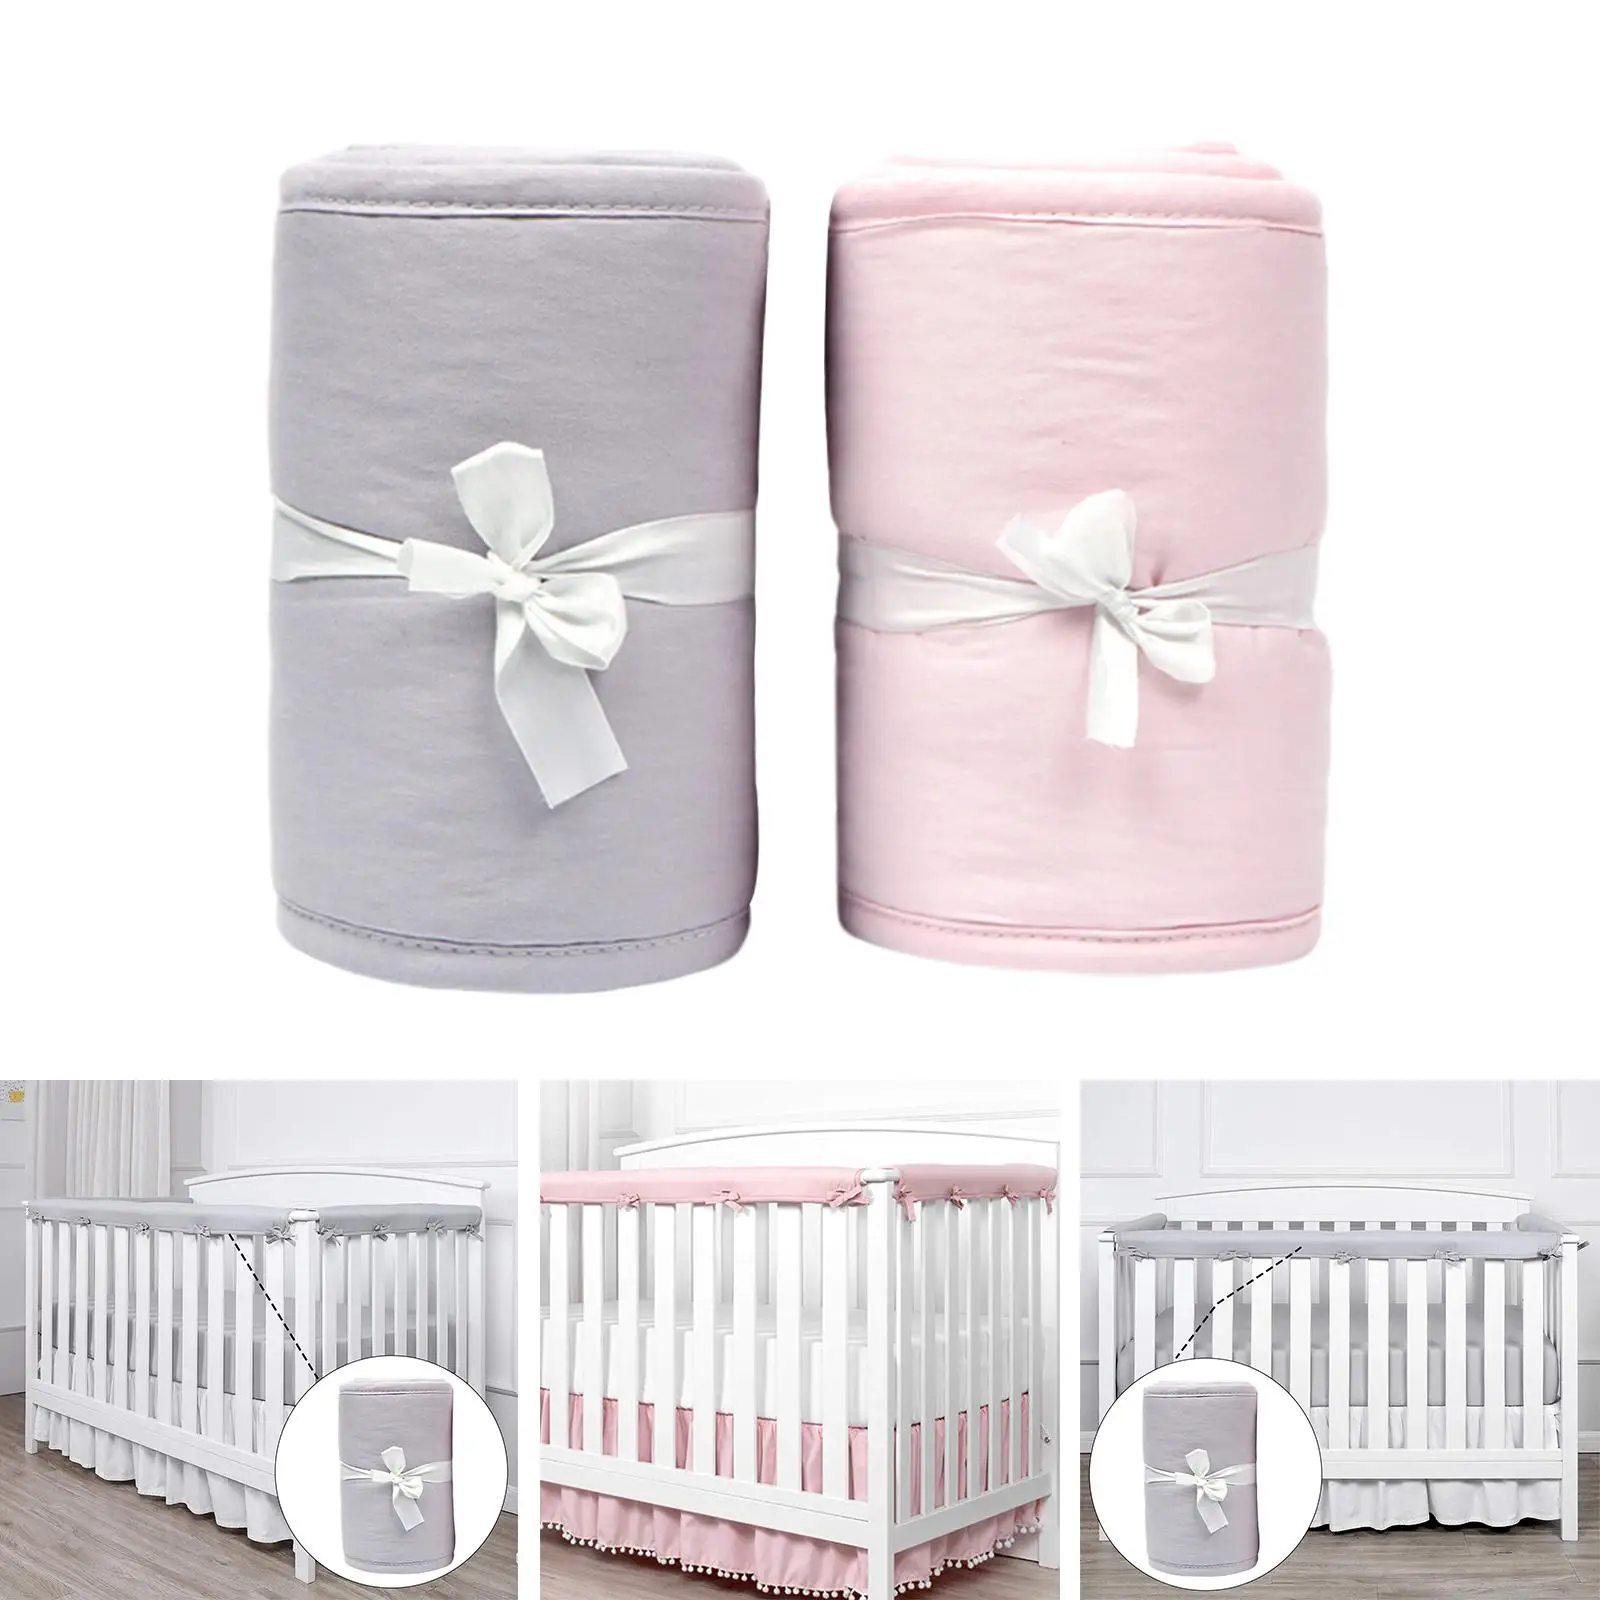 Cotton Baby Crib Rail Cover Baby Safety Products 3Pcs for Infants Toddlers